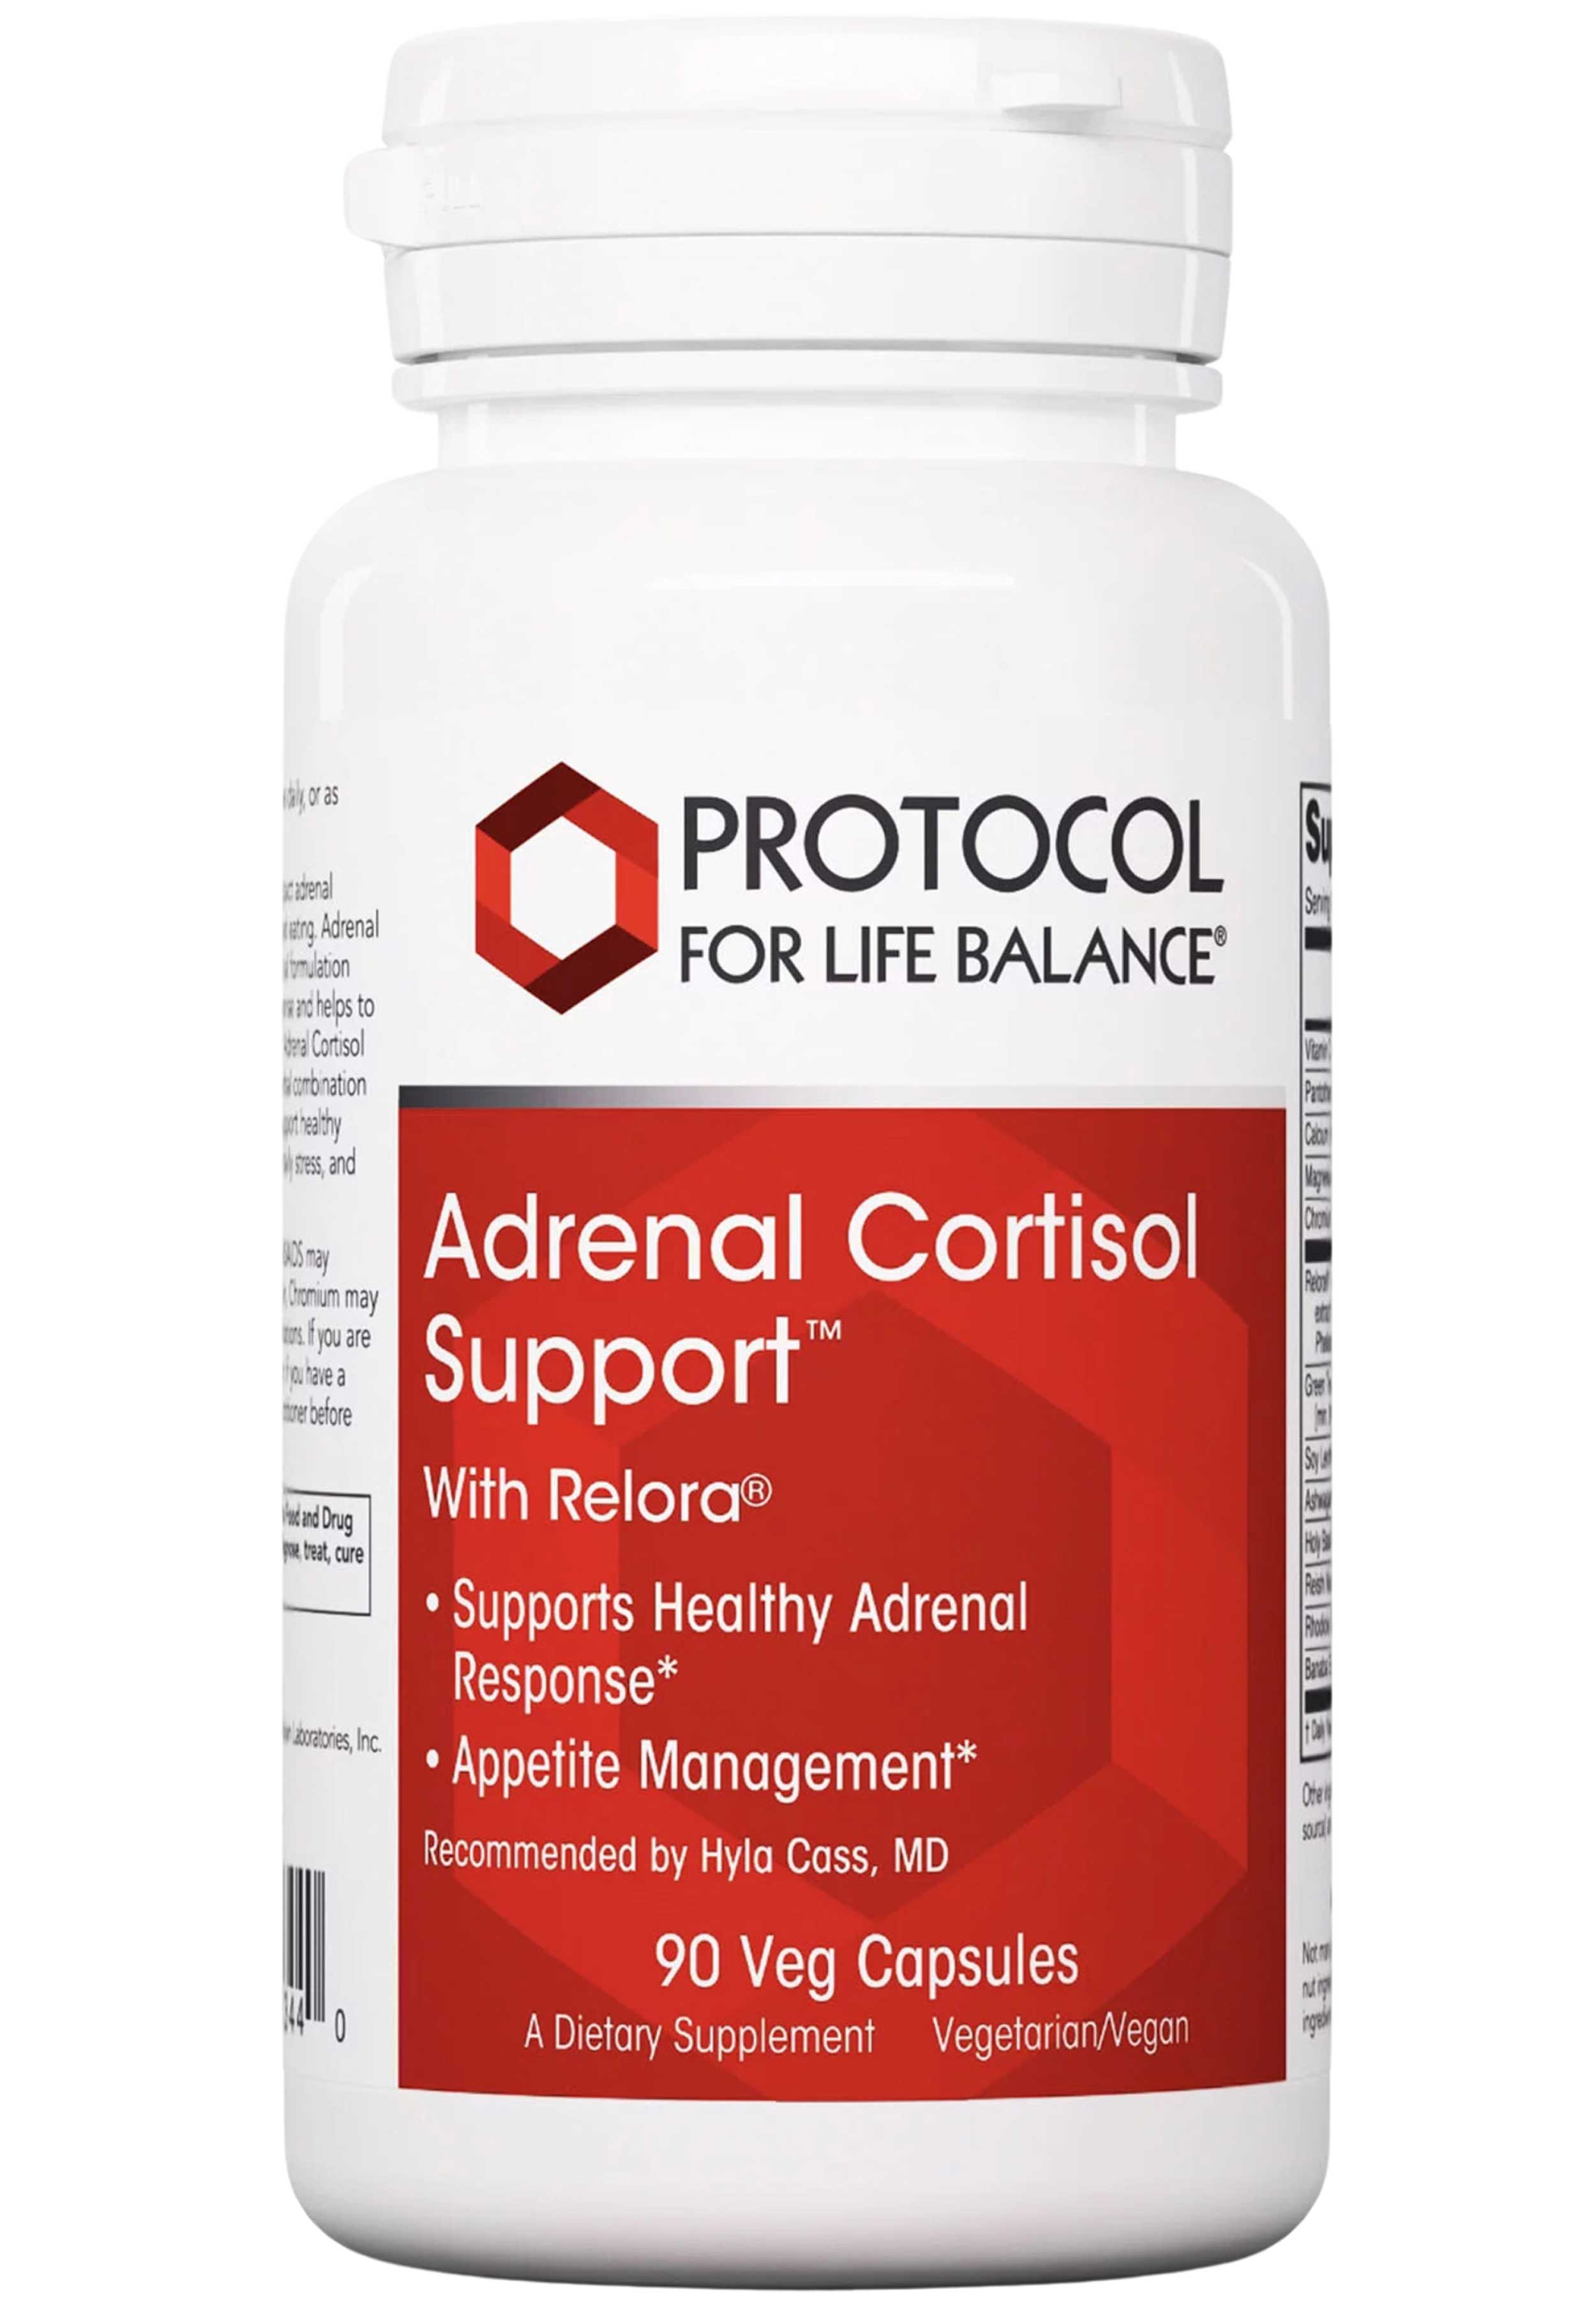 Protocol for Life Balance Adrenal Cortisol Support